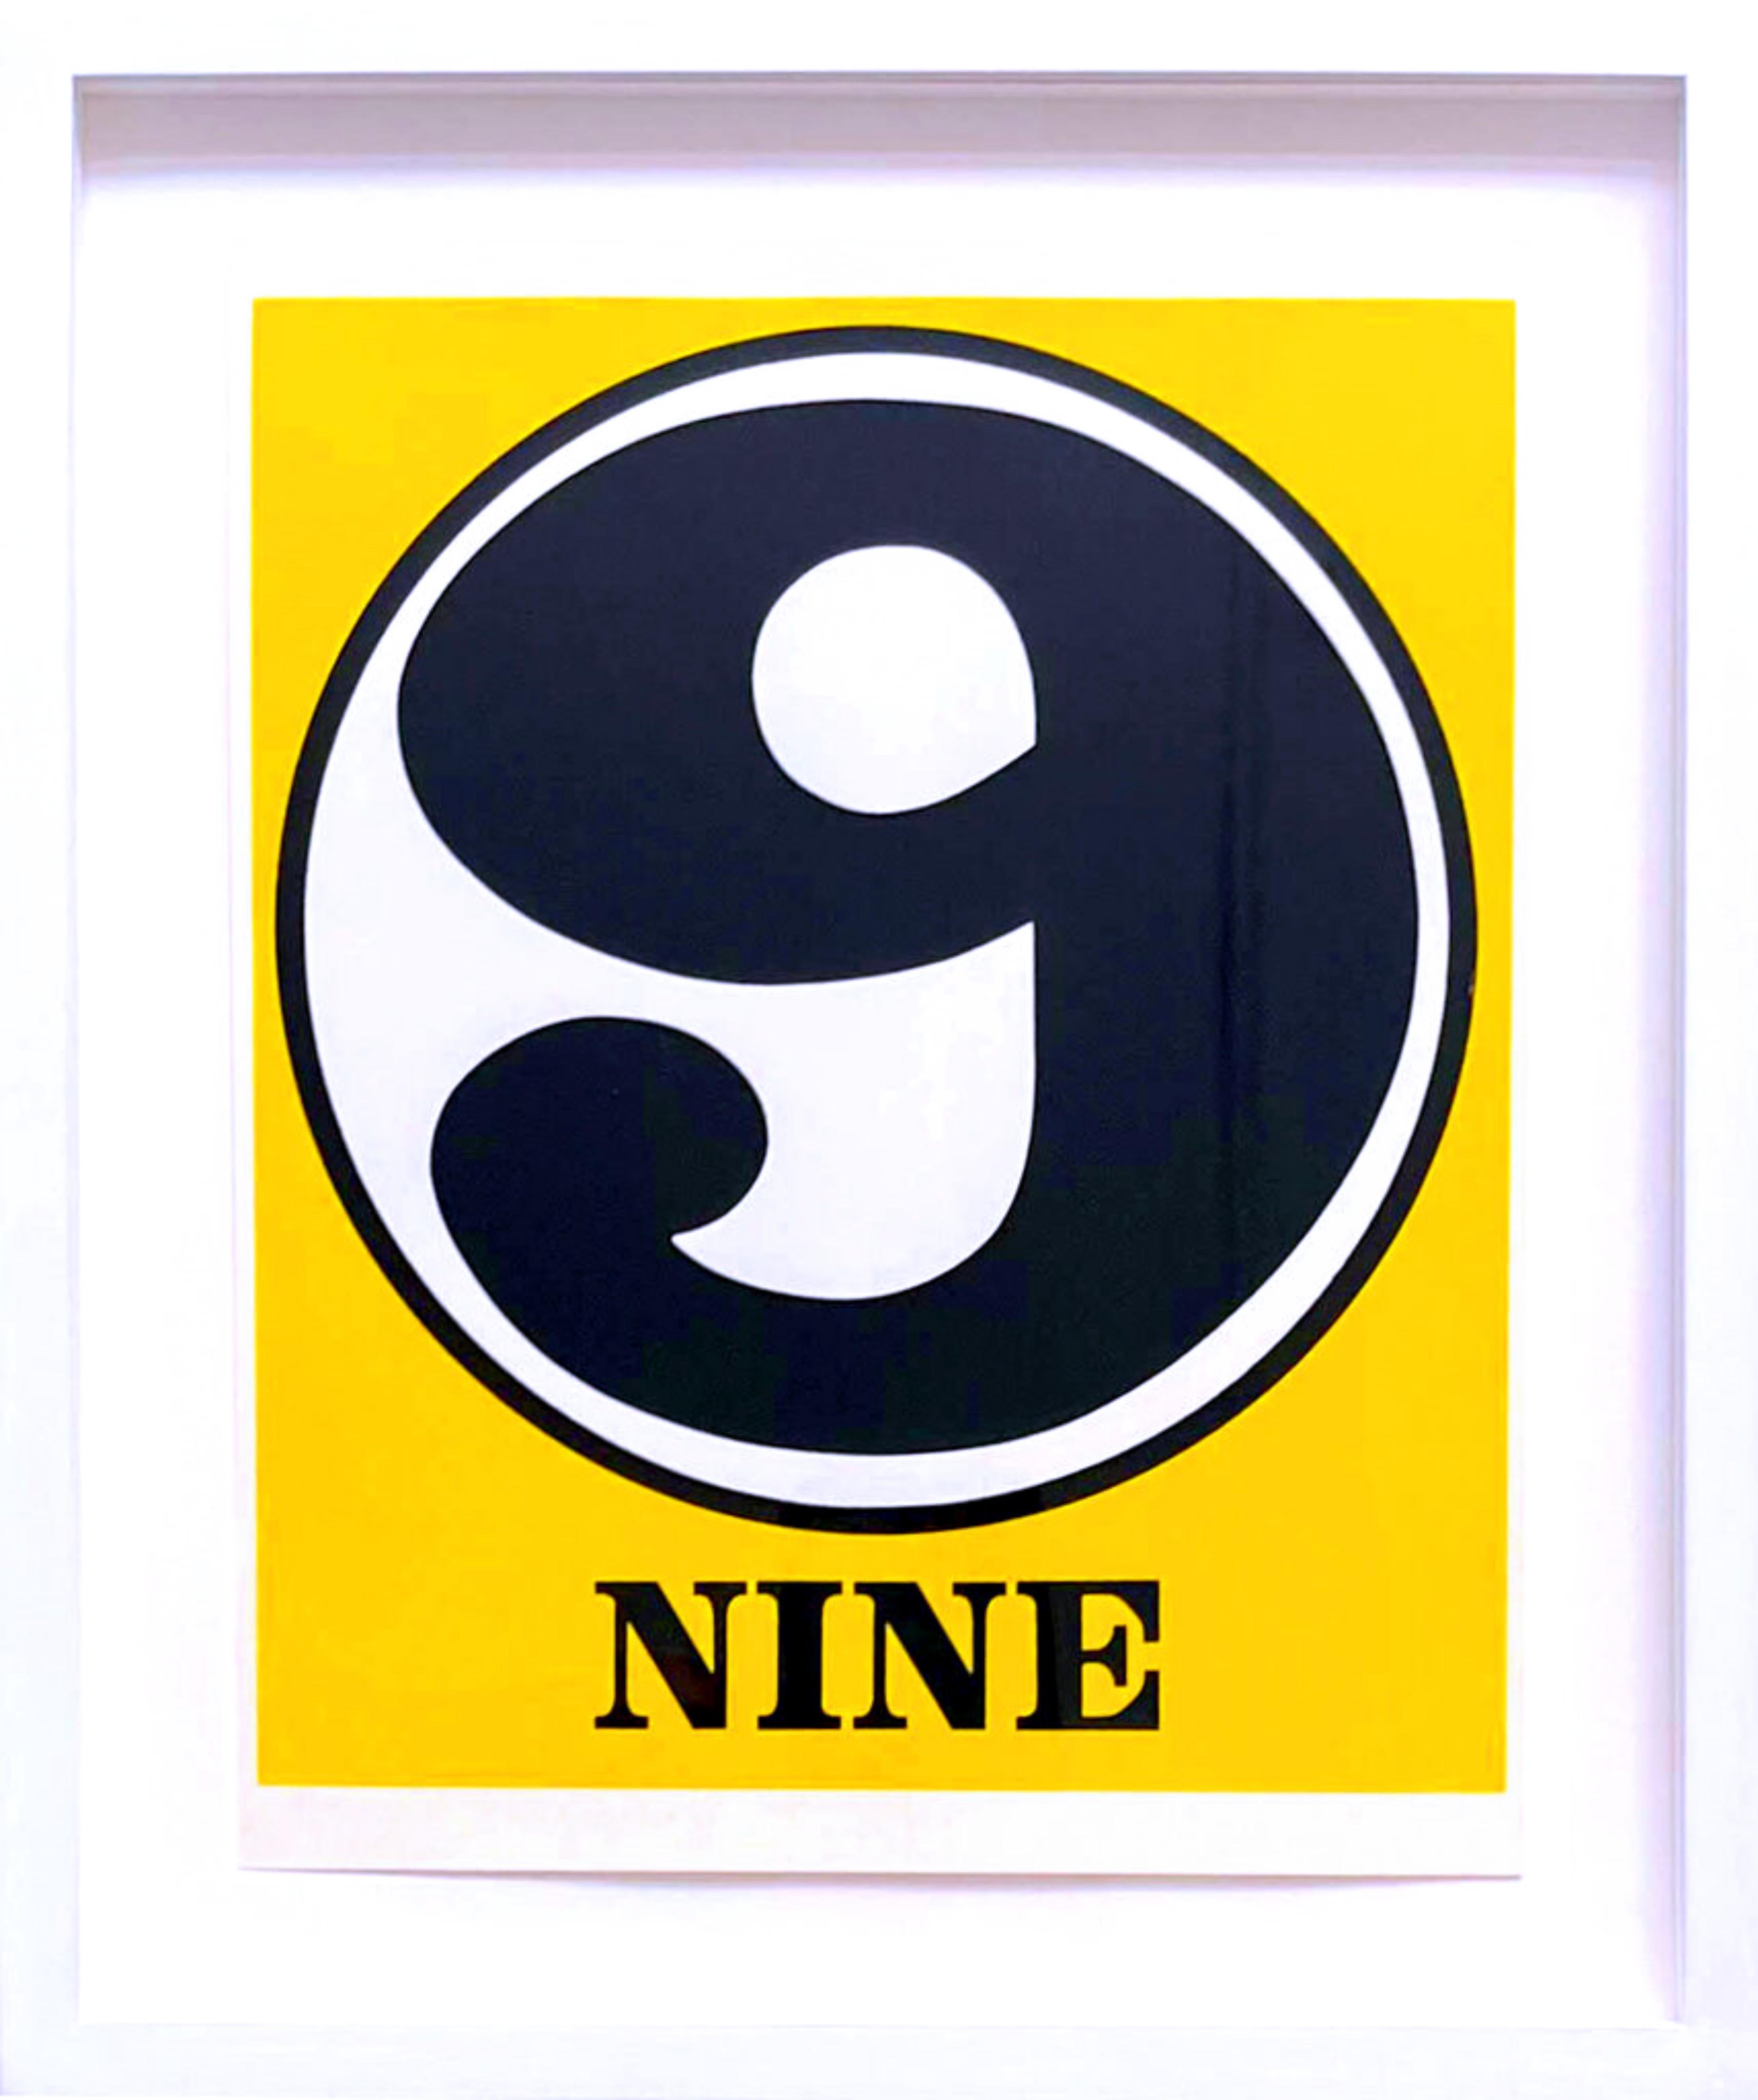 Robert Indiana Figurative Print - 9 (Nine), from the original Numbers portfolio (Sheehan 46-55) - FRAME included 